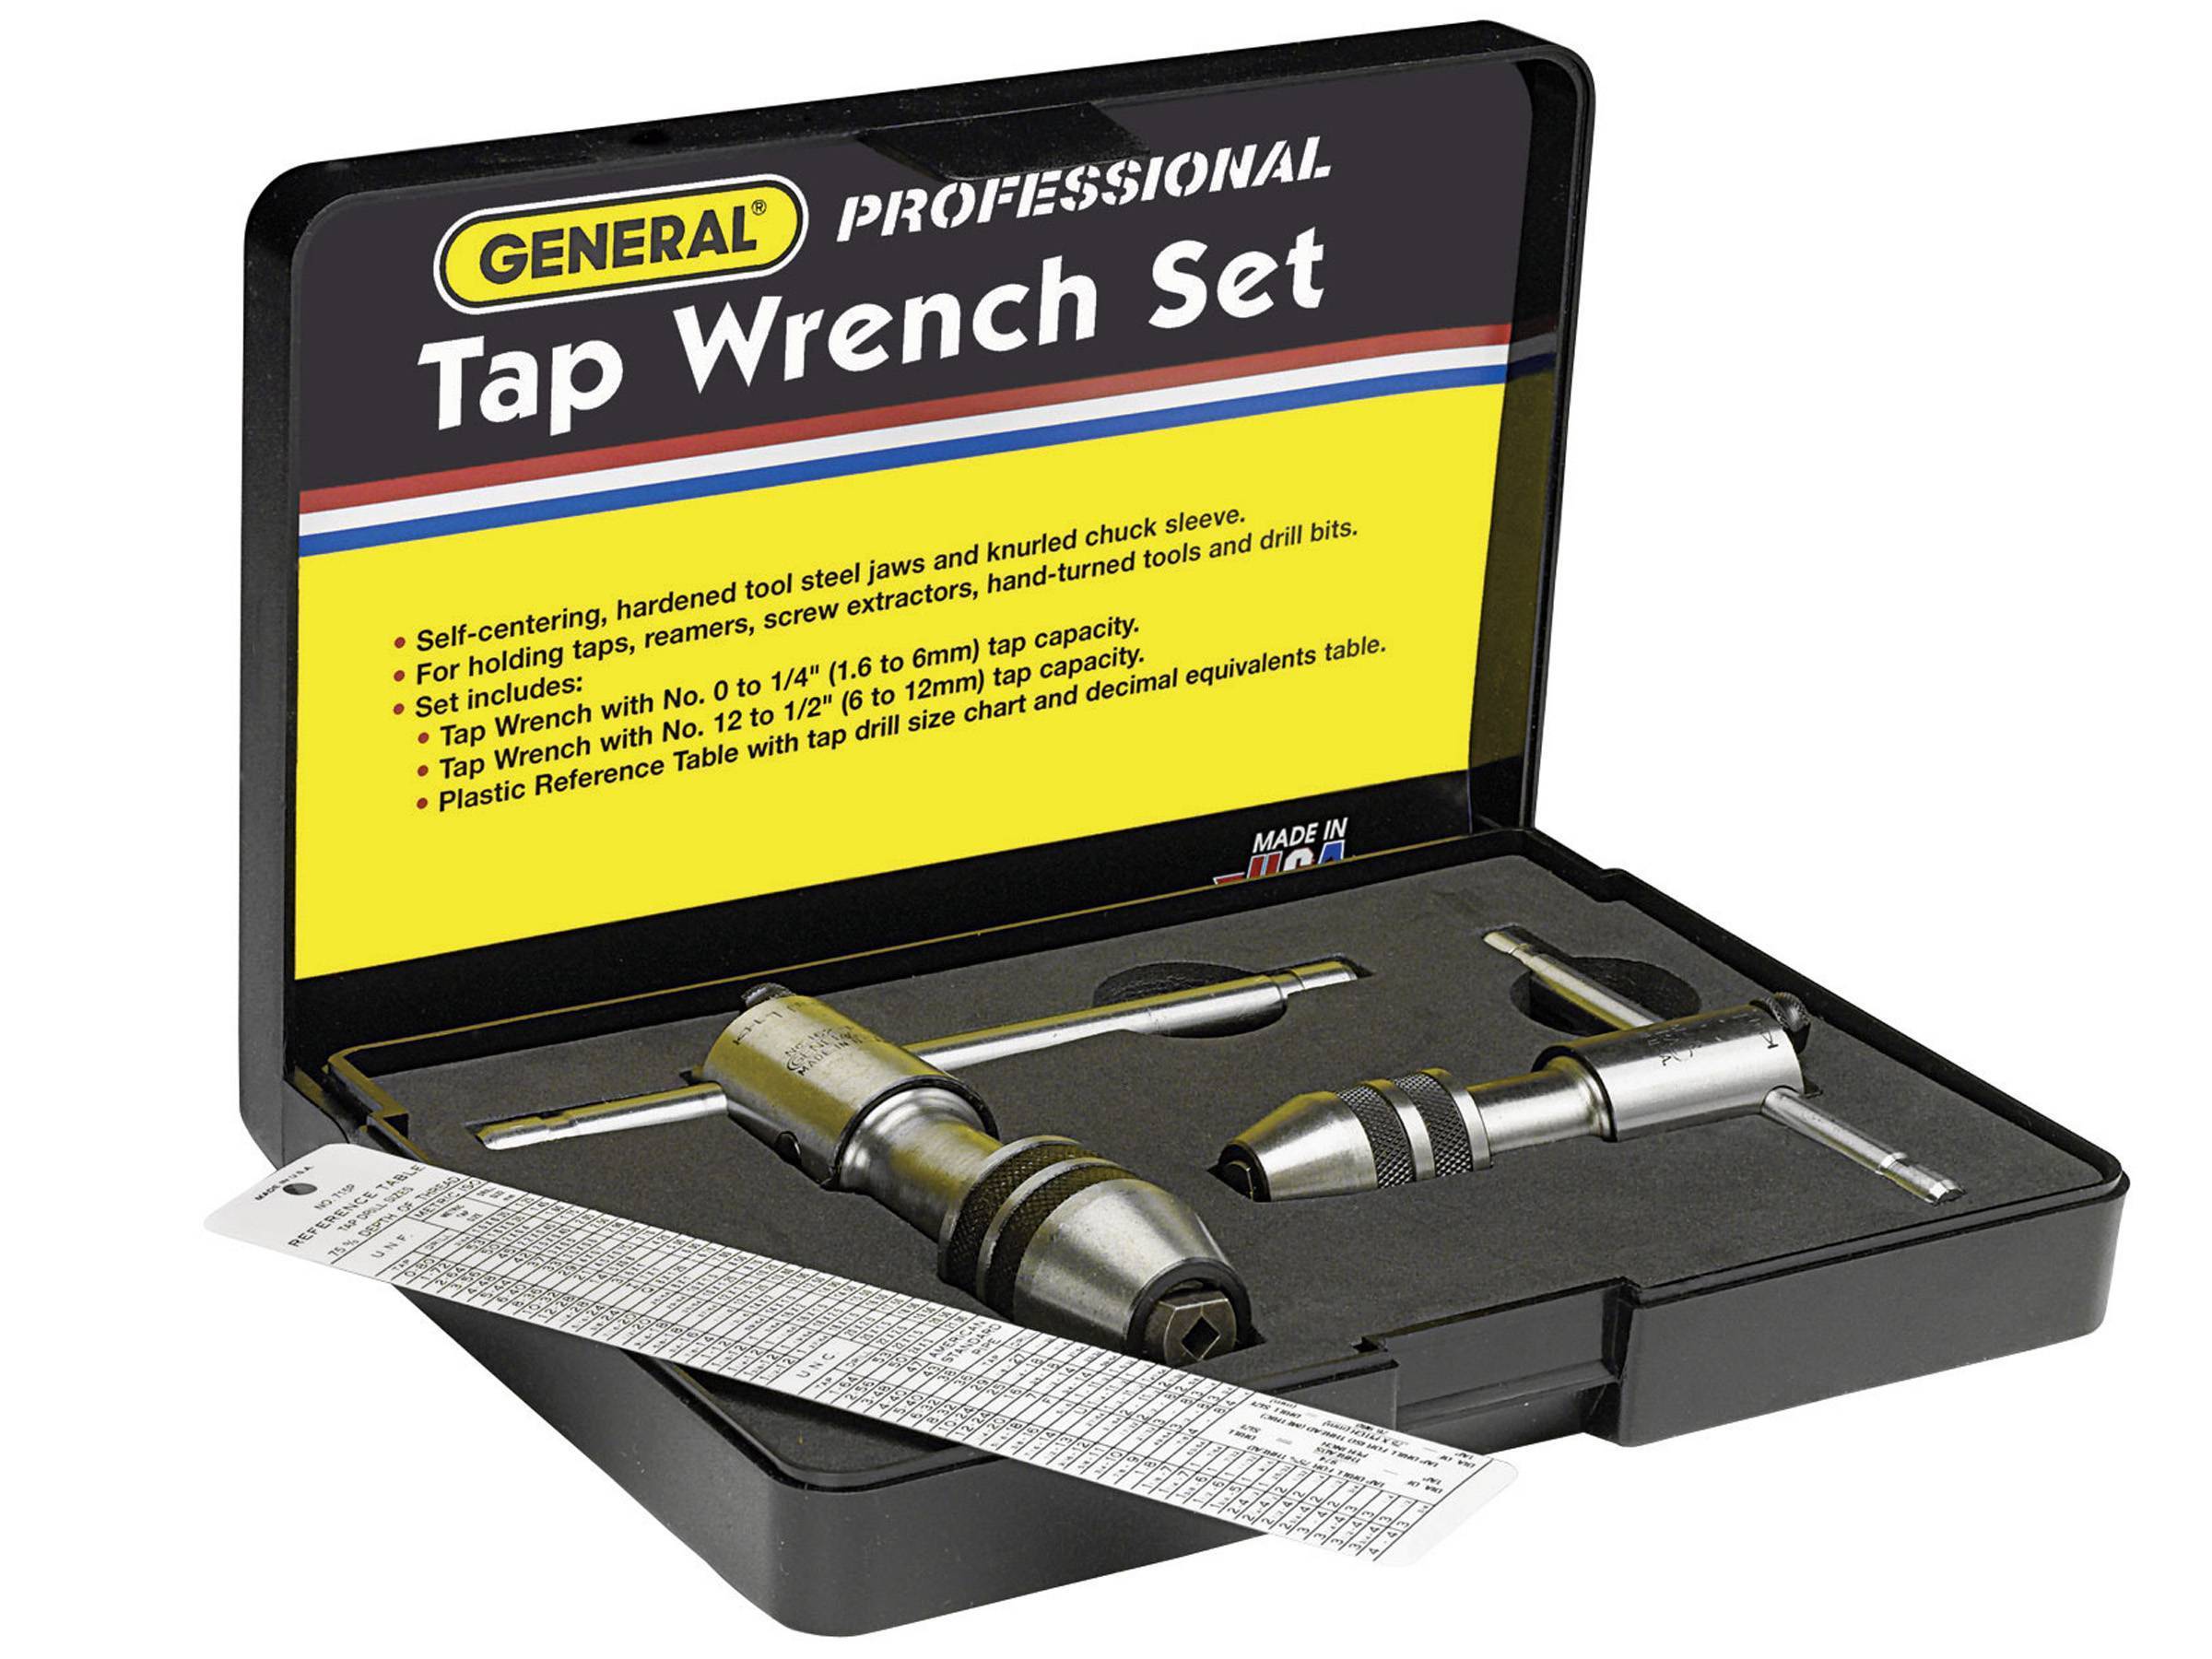 Brand New Ratchet Type Tap Wrench with Interchangeable Heads Set Capacities 1/8 to 1/4 & 1/4 to 1/2 